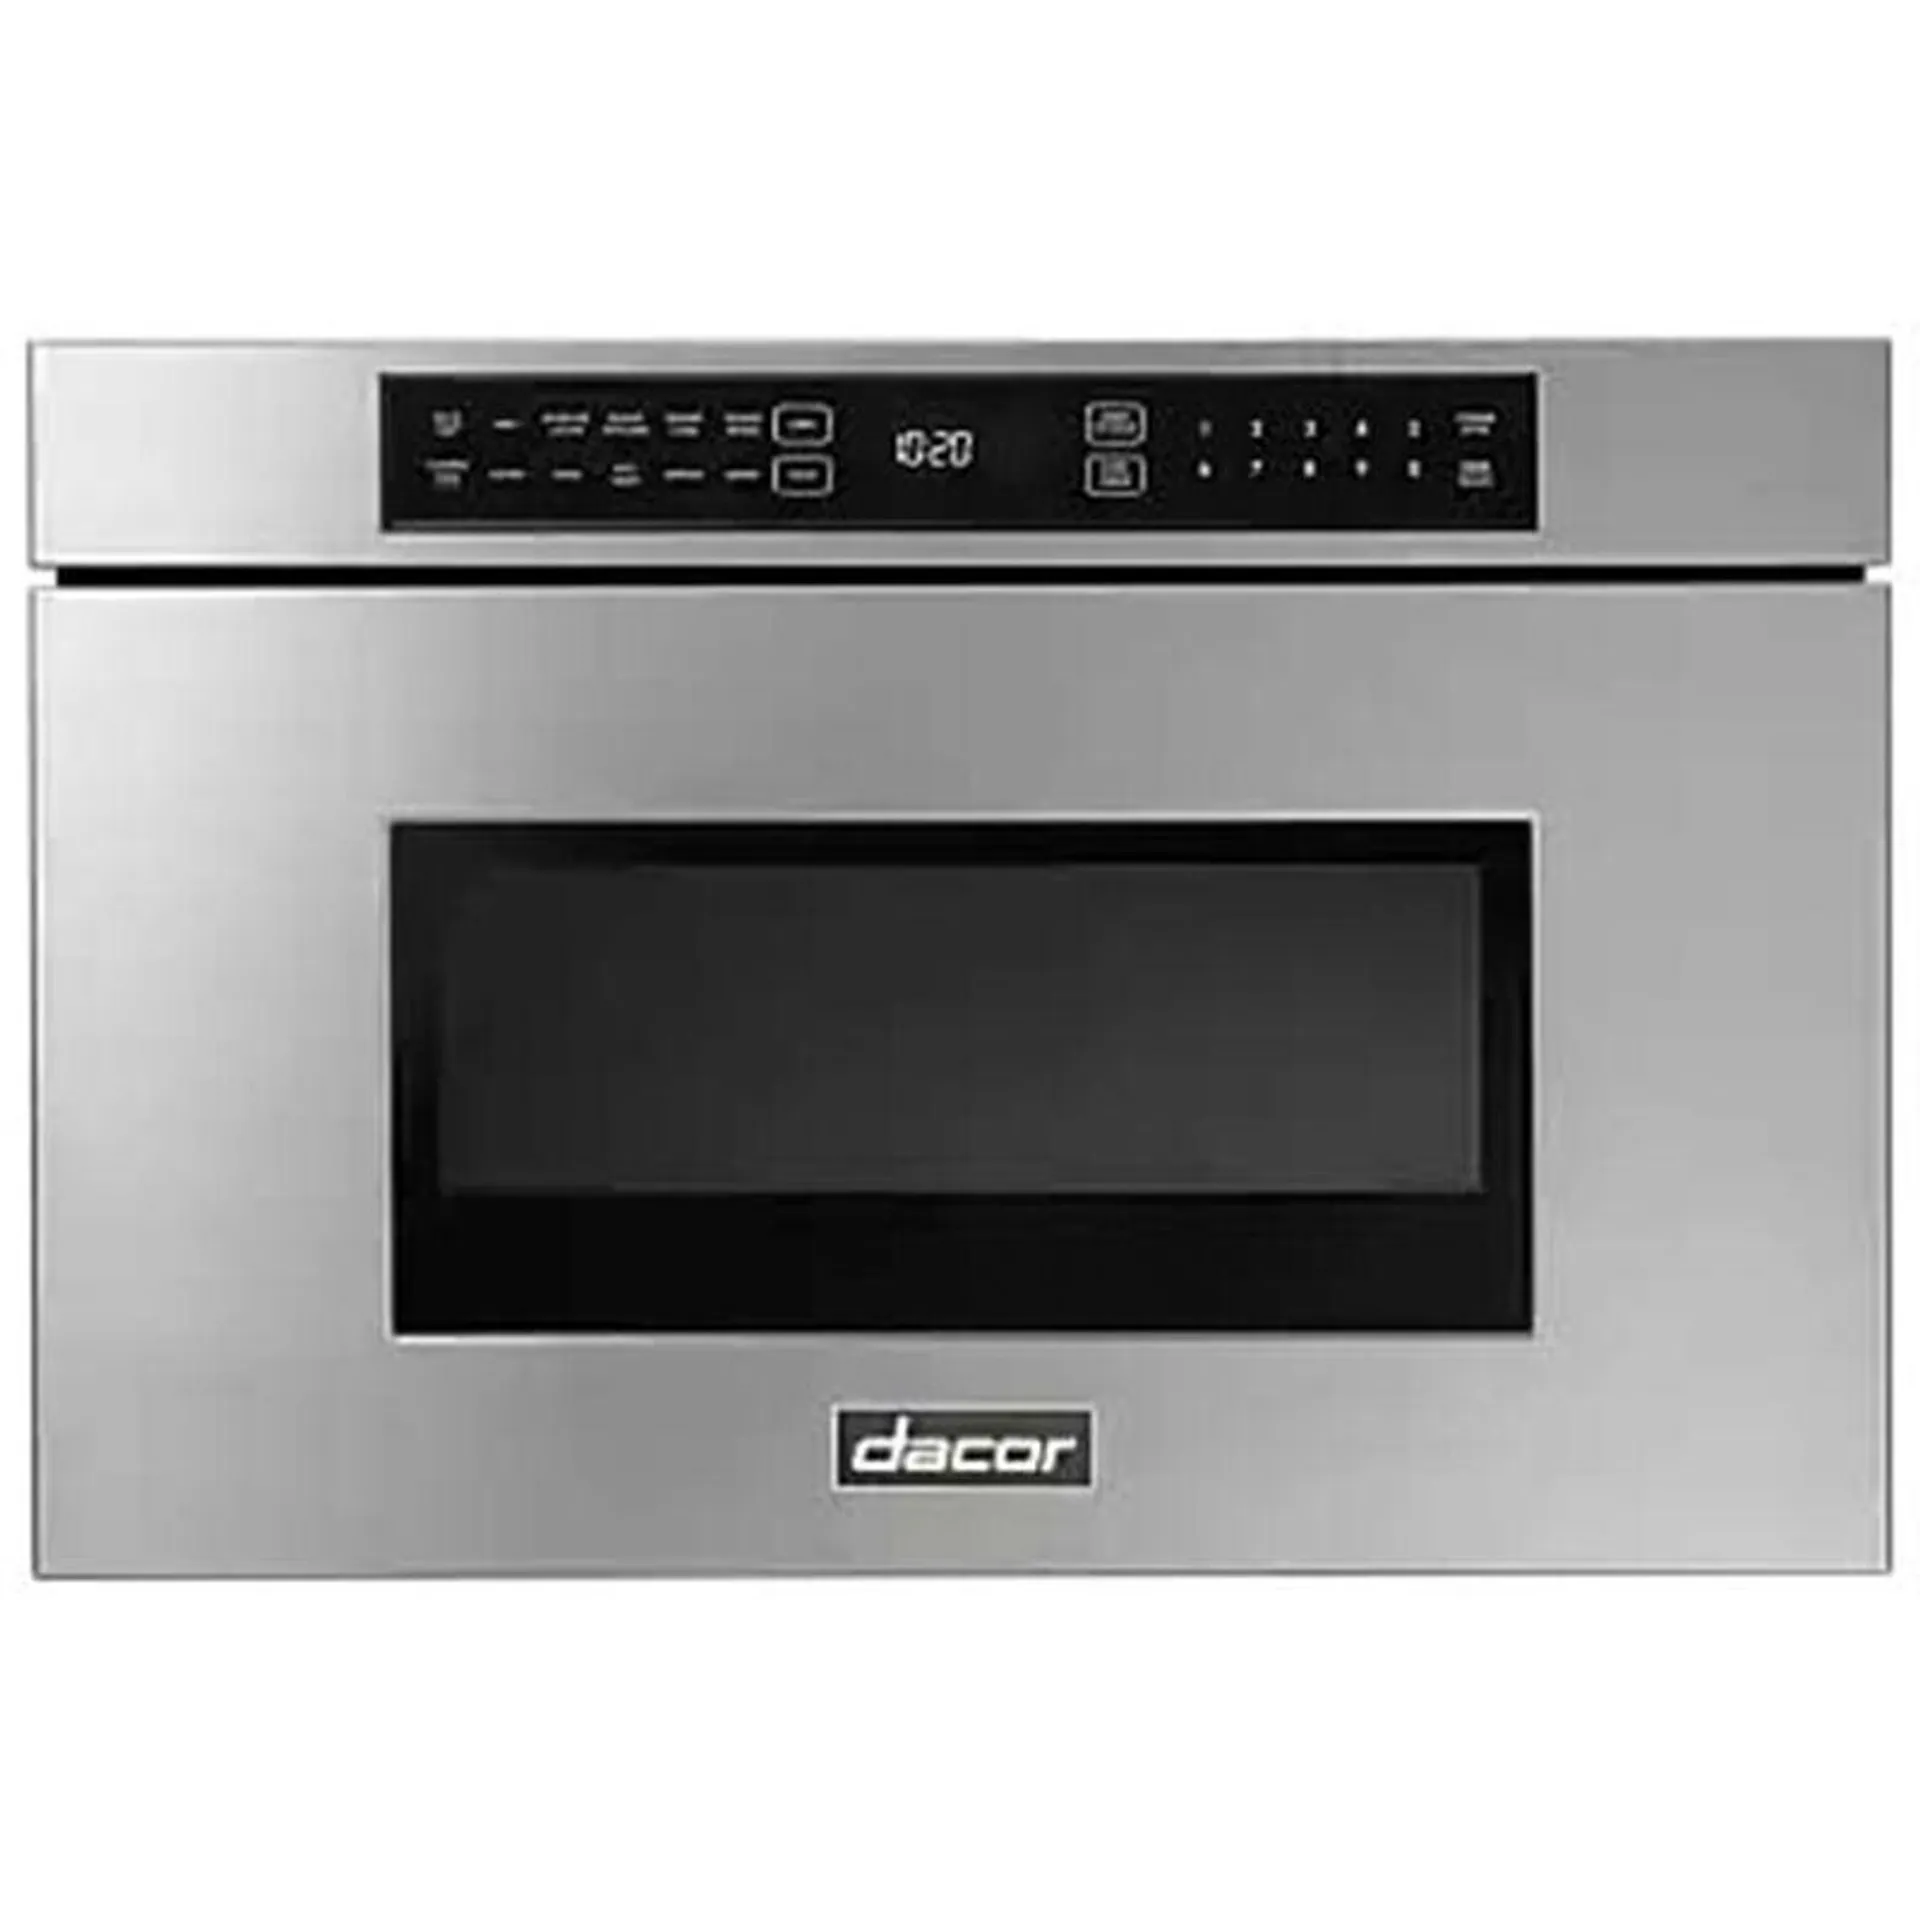 Dacor 24 in. 1.2 cu. ft. Drawer Microwave with 11 Power Levels & Sensor Cooking Control - Silver Stainless